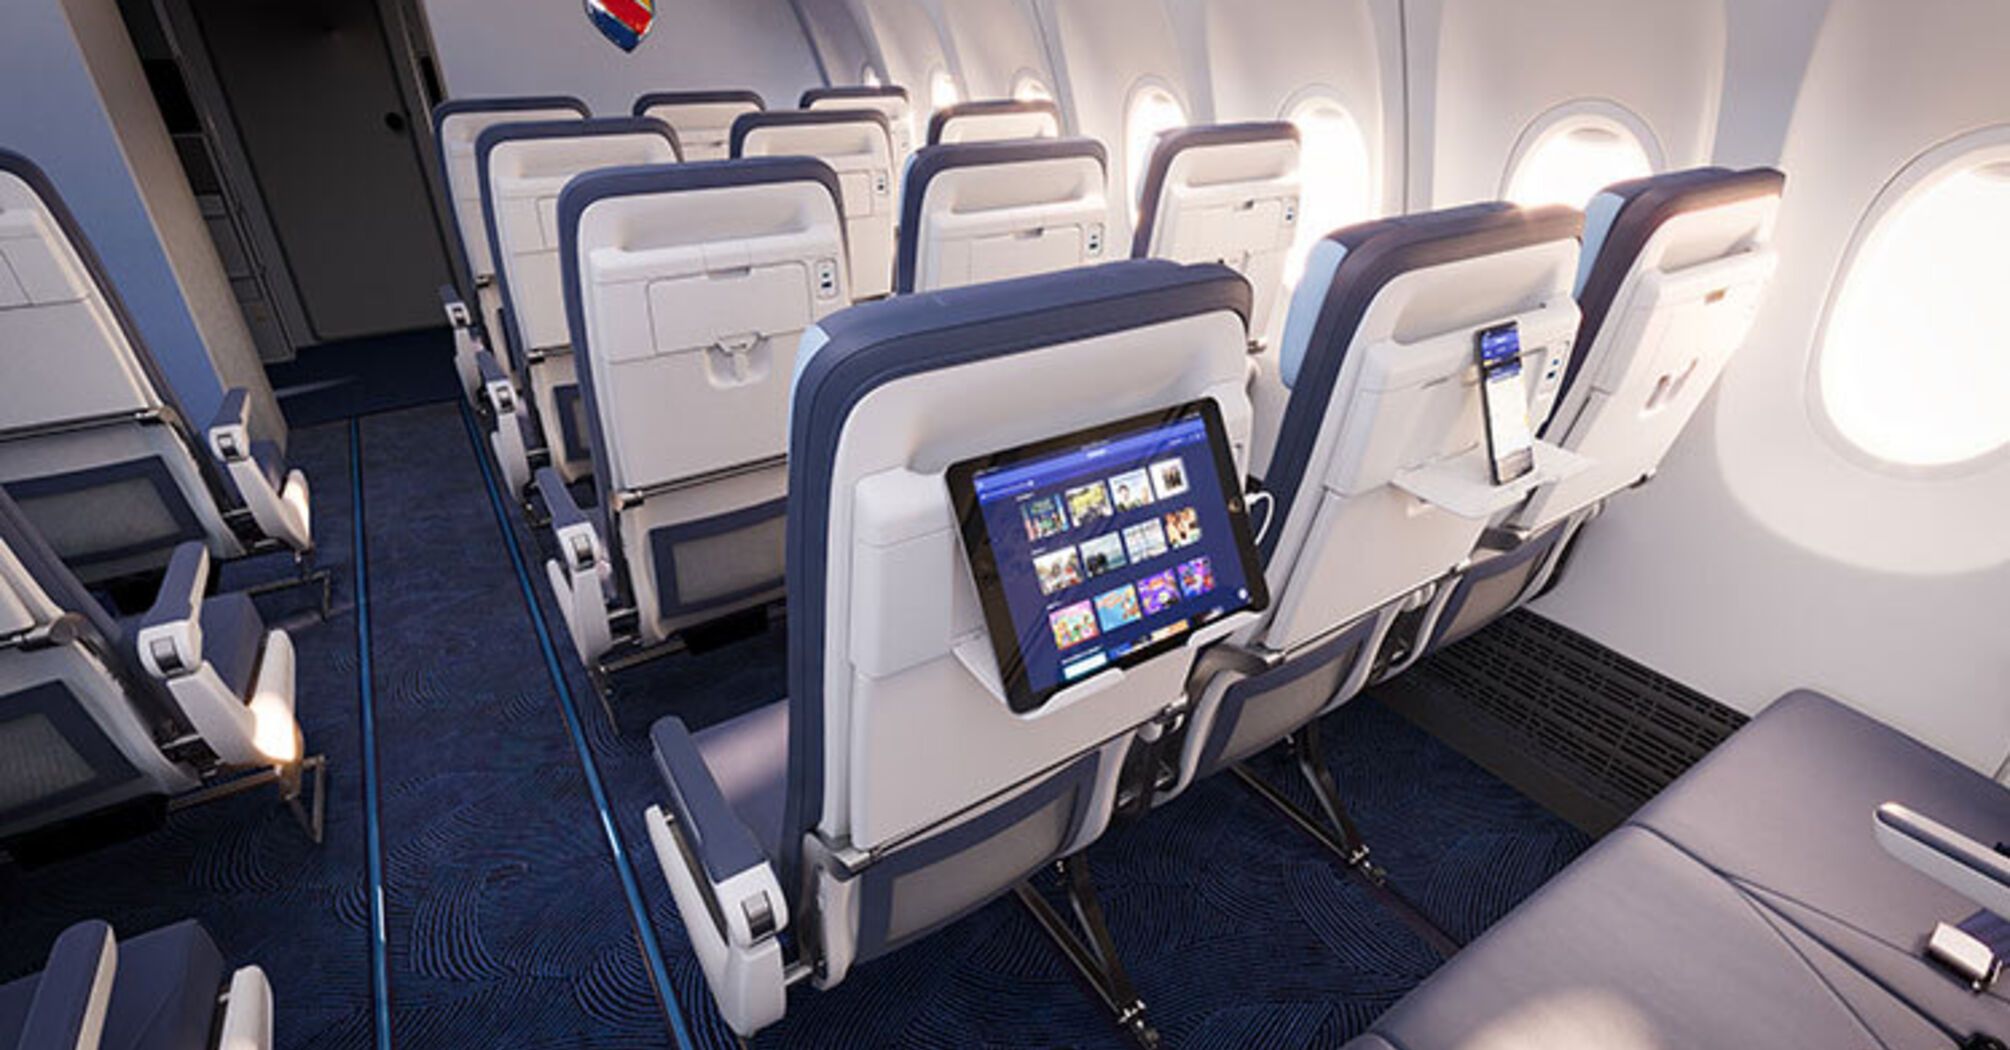 Southwest Airlines plans to update the interior of new planes: What will change